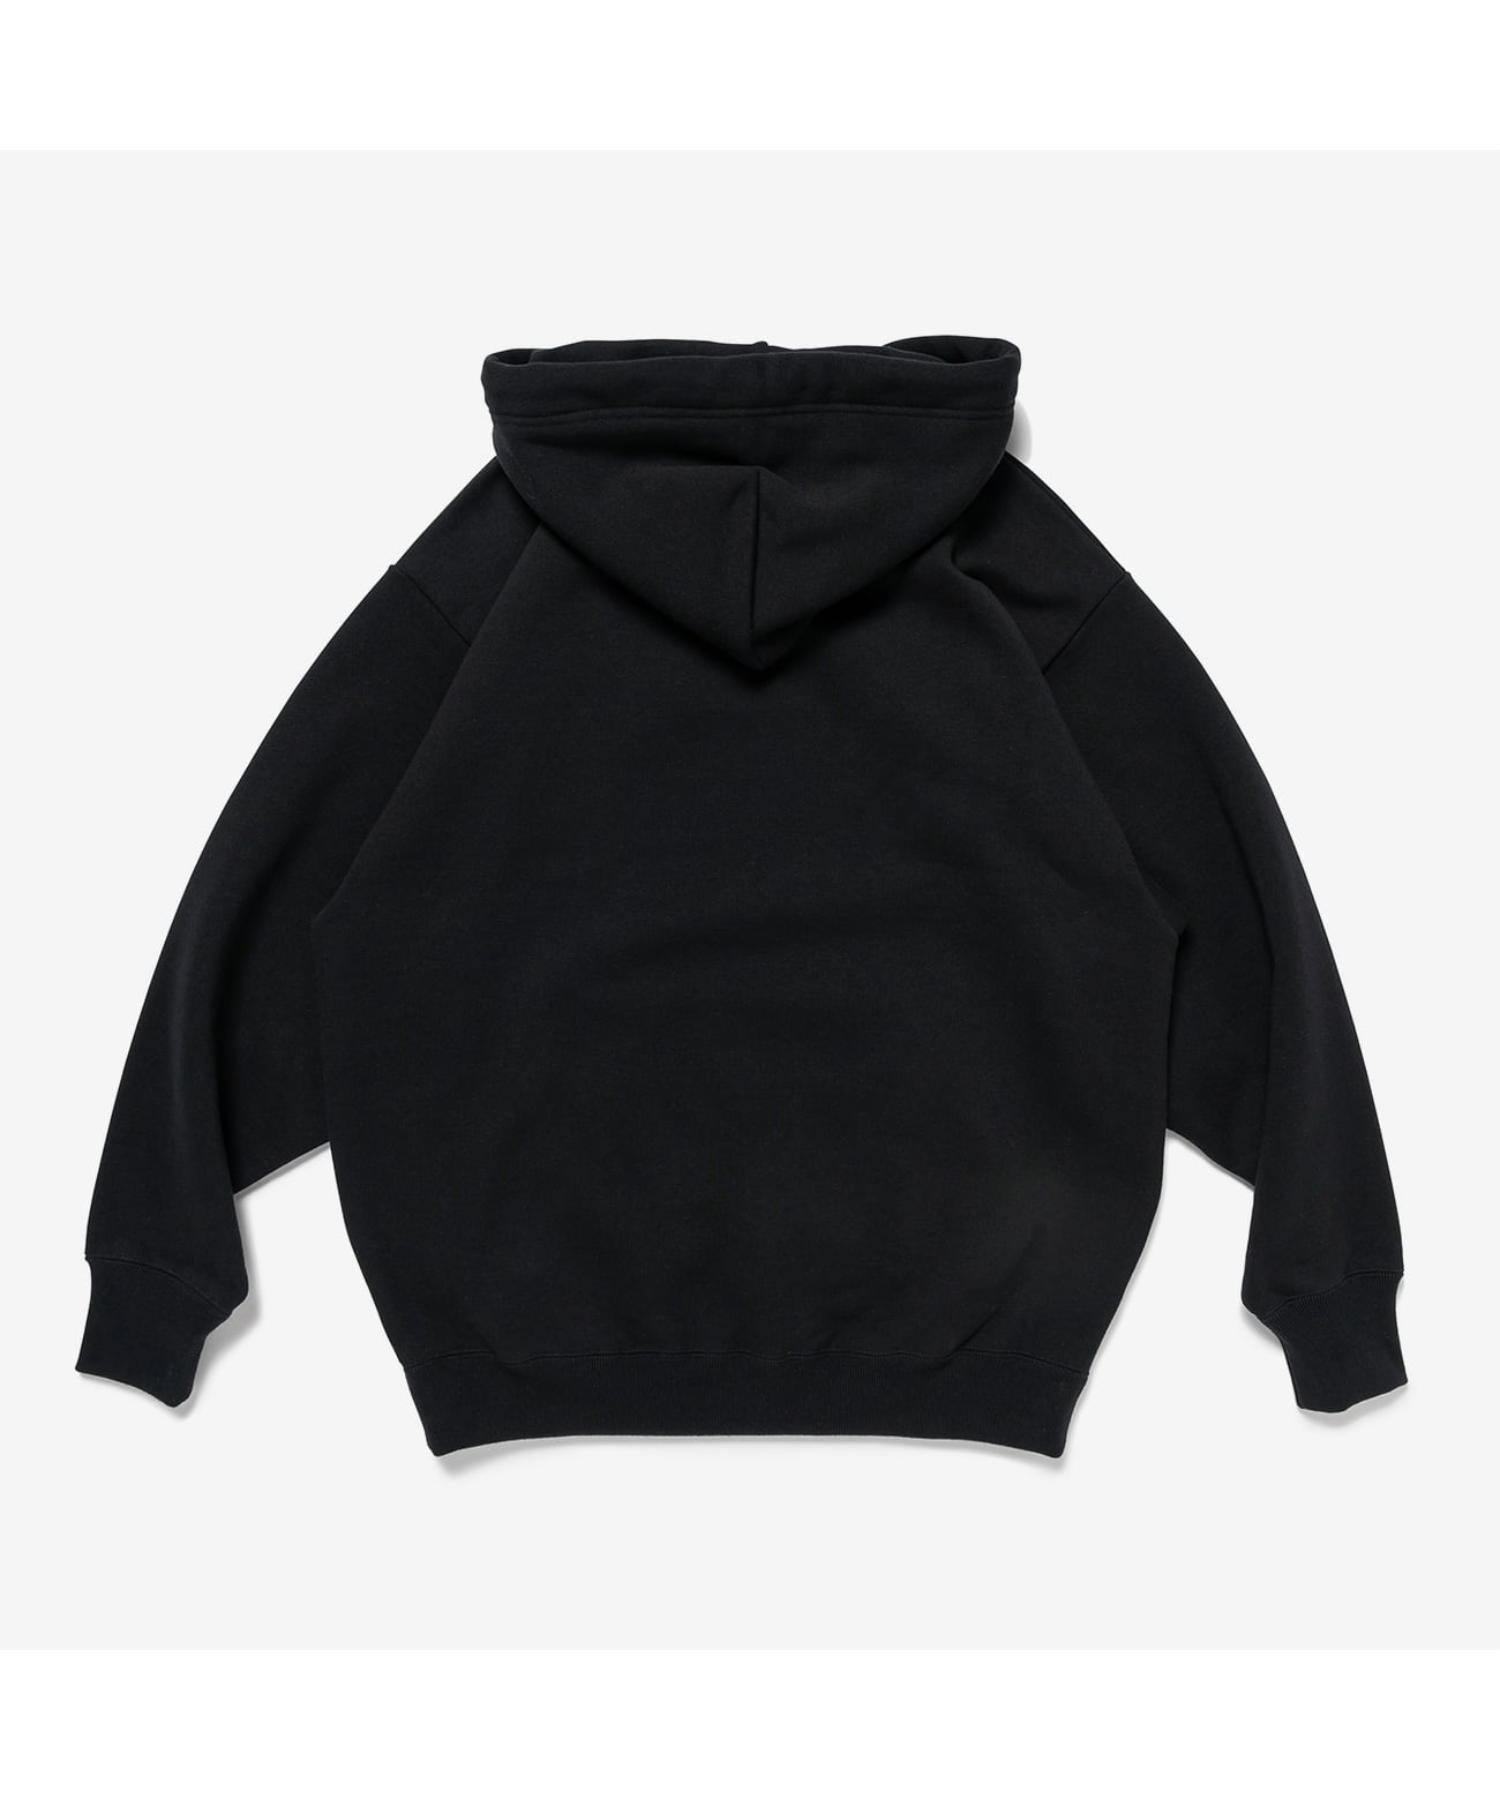 ACADEMY / HOODY / COTTON. COLLEGE - WTAPS (ダブルタップス) - tops ...